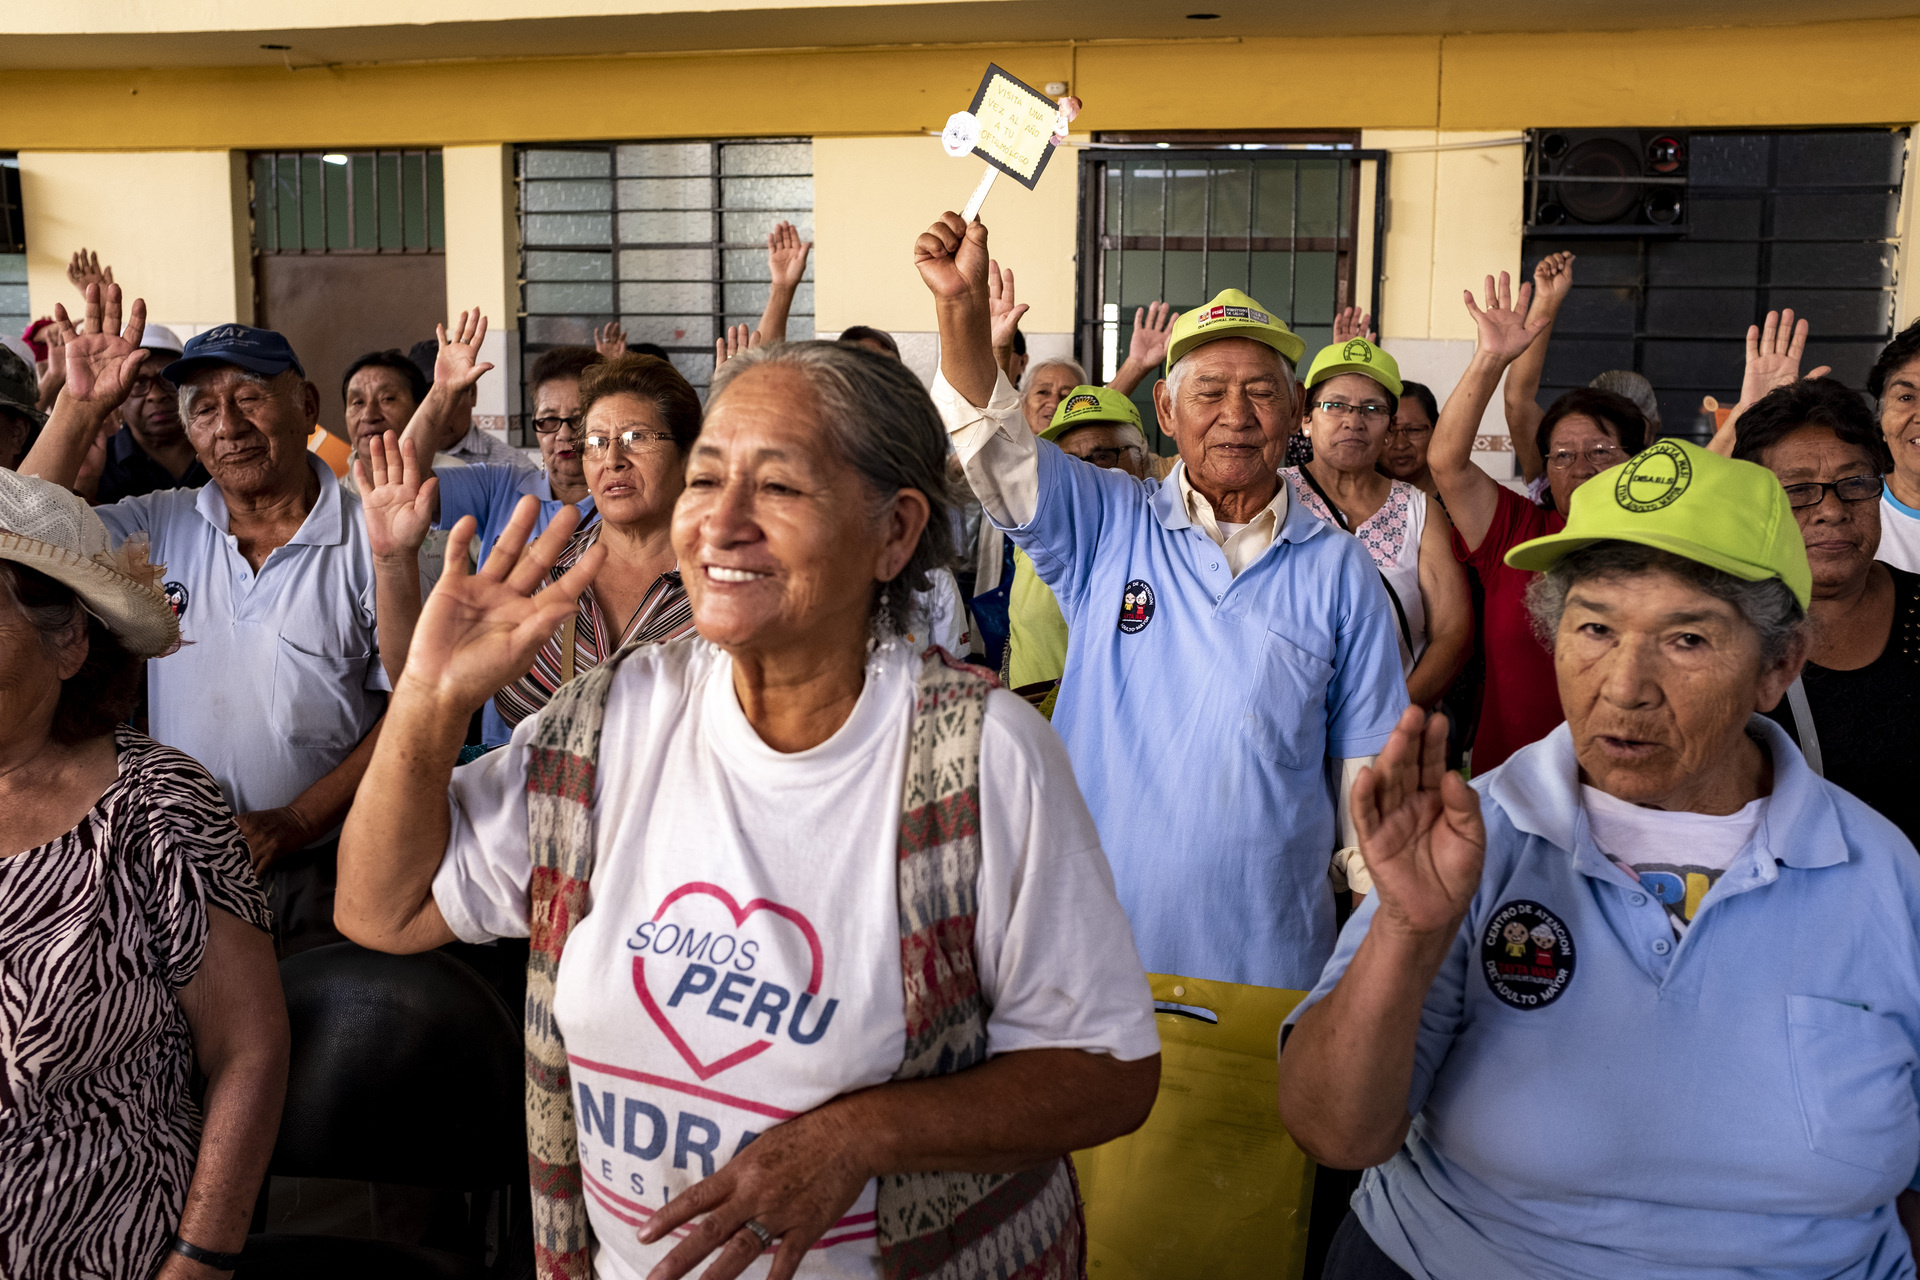 A group of older people raising their hands